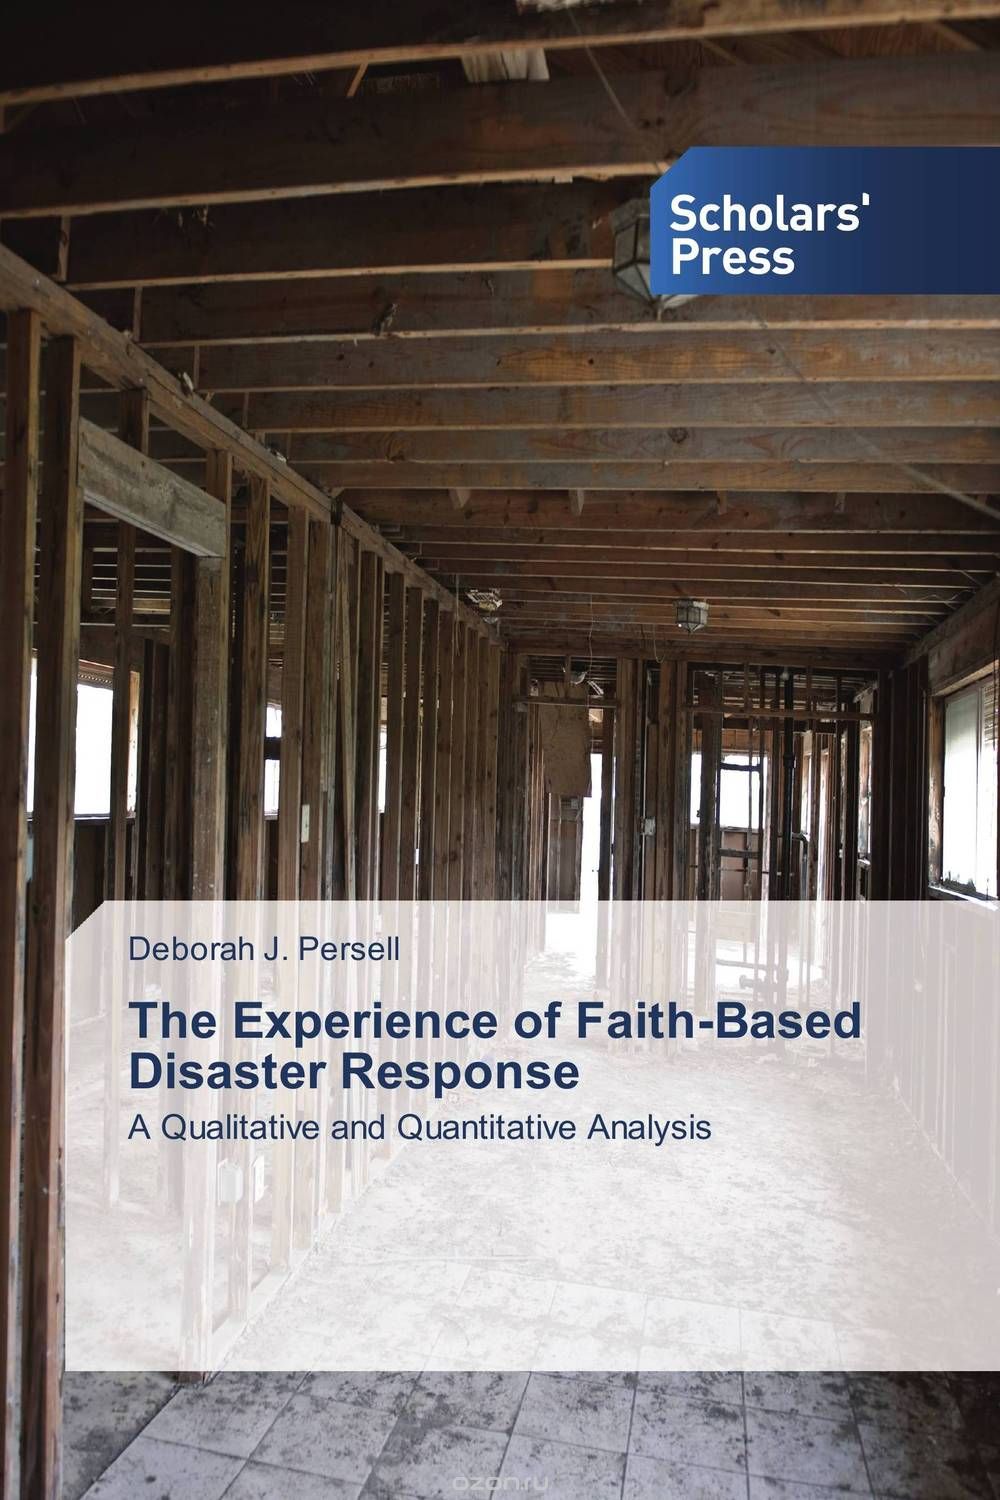 The Experience of Faith-Based Disaster Response